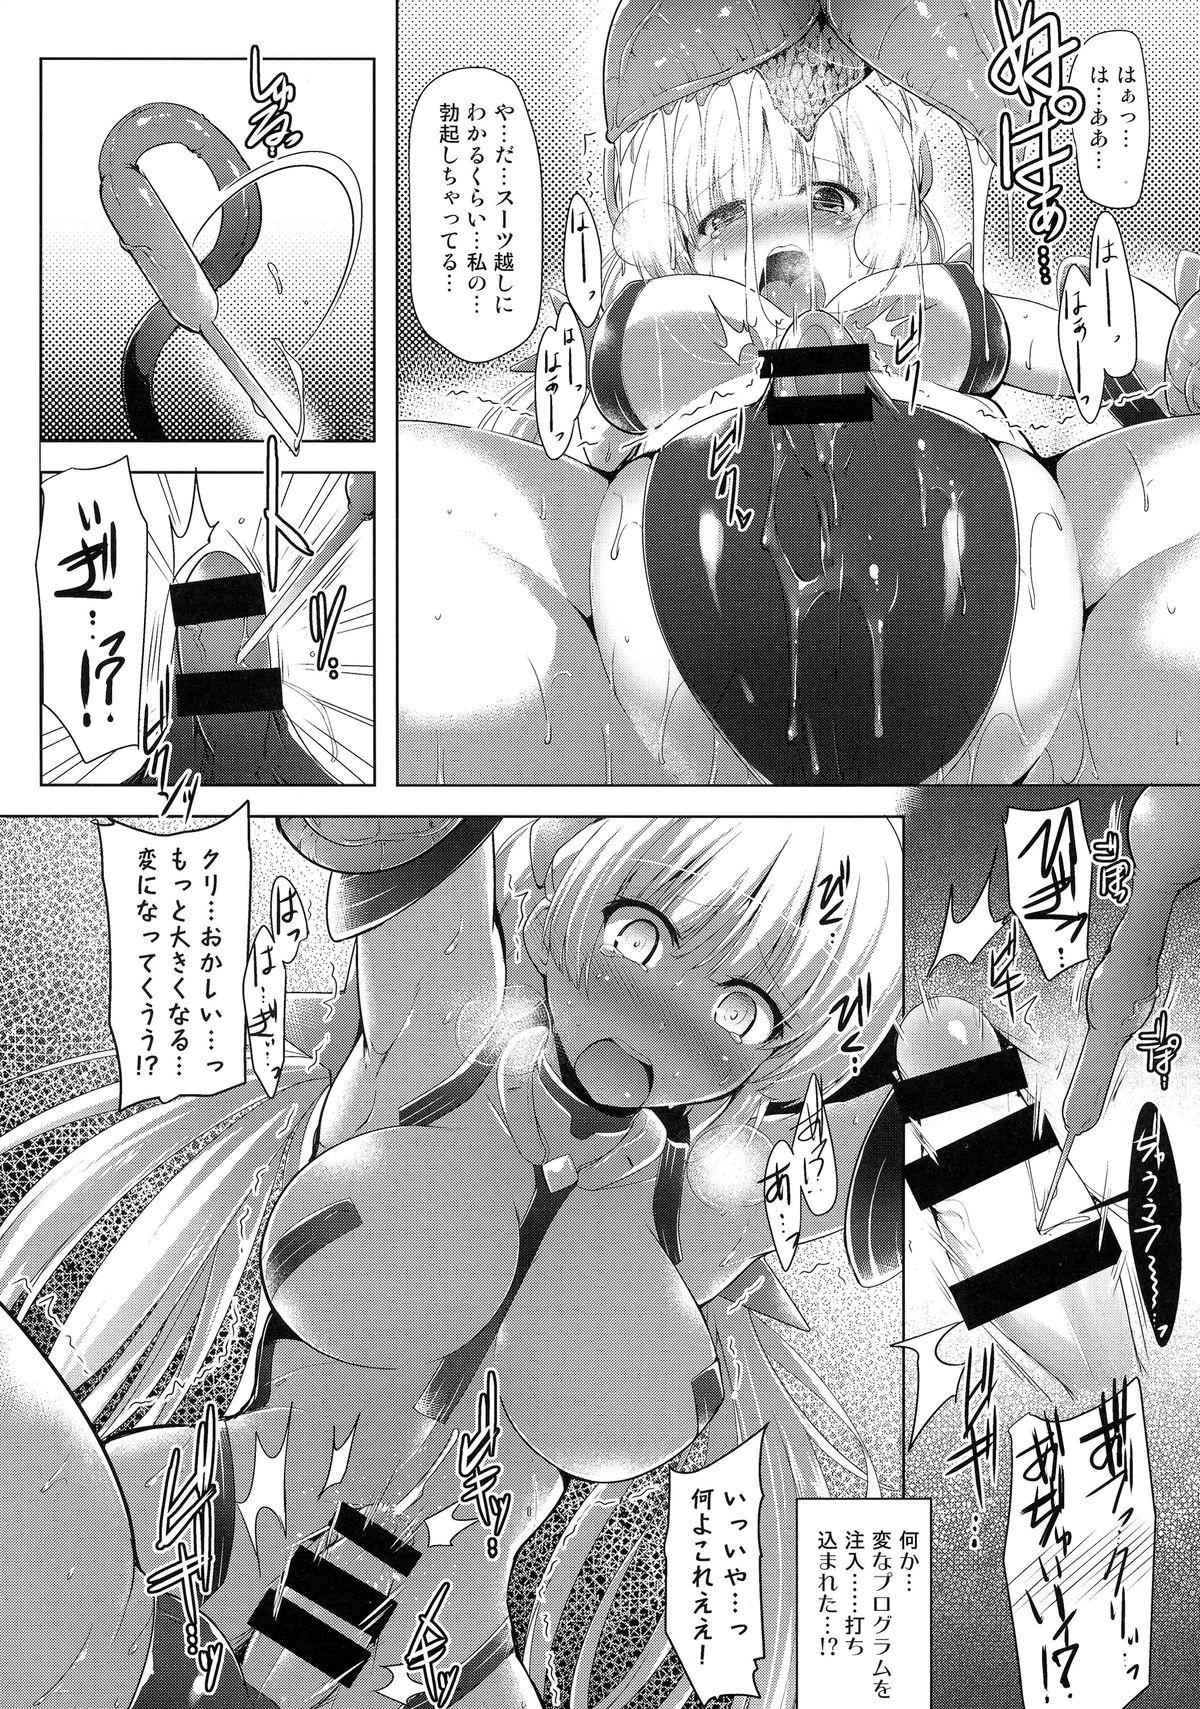 Mallu K.231 - Expelled from paradise Doggystyle - Page 8